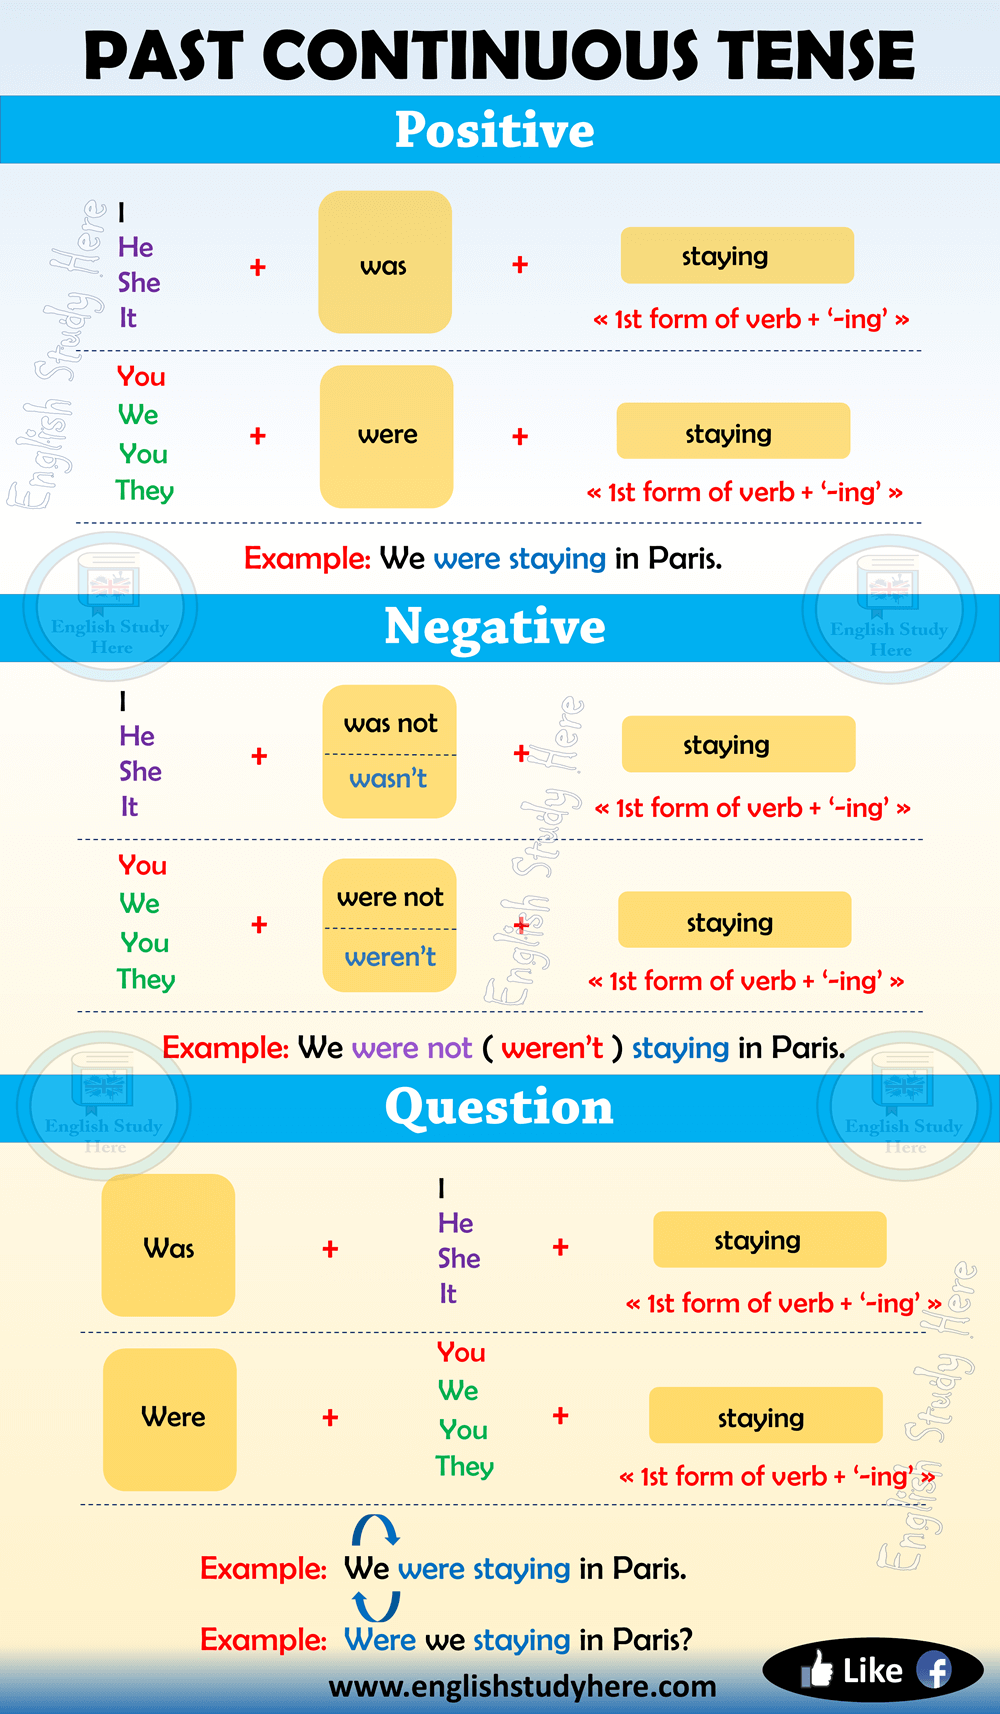 Past Continuous Tense in English - English Study Here